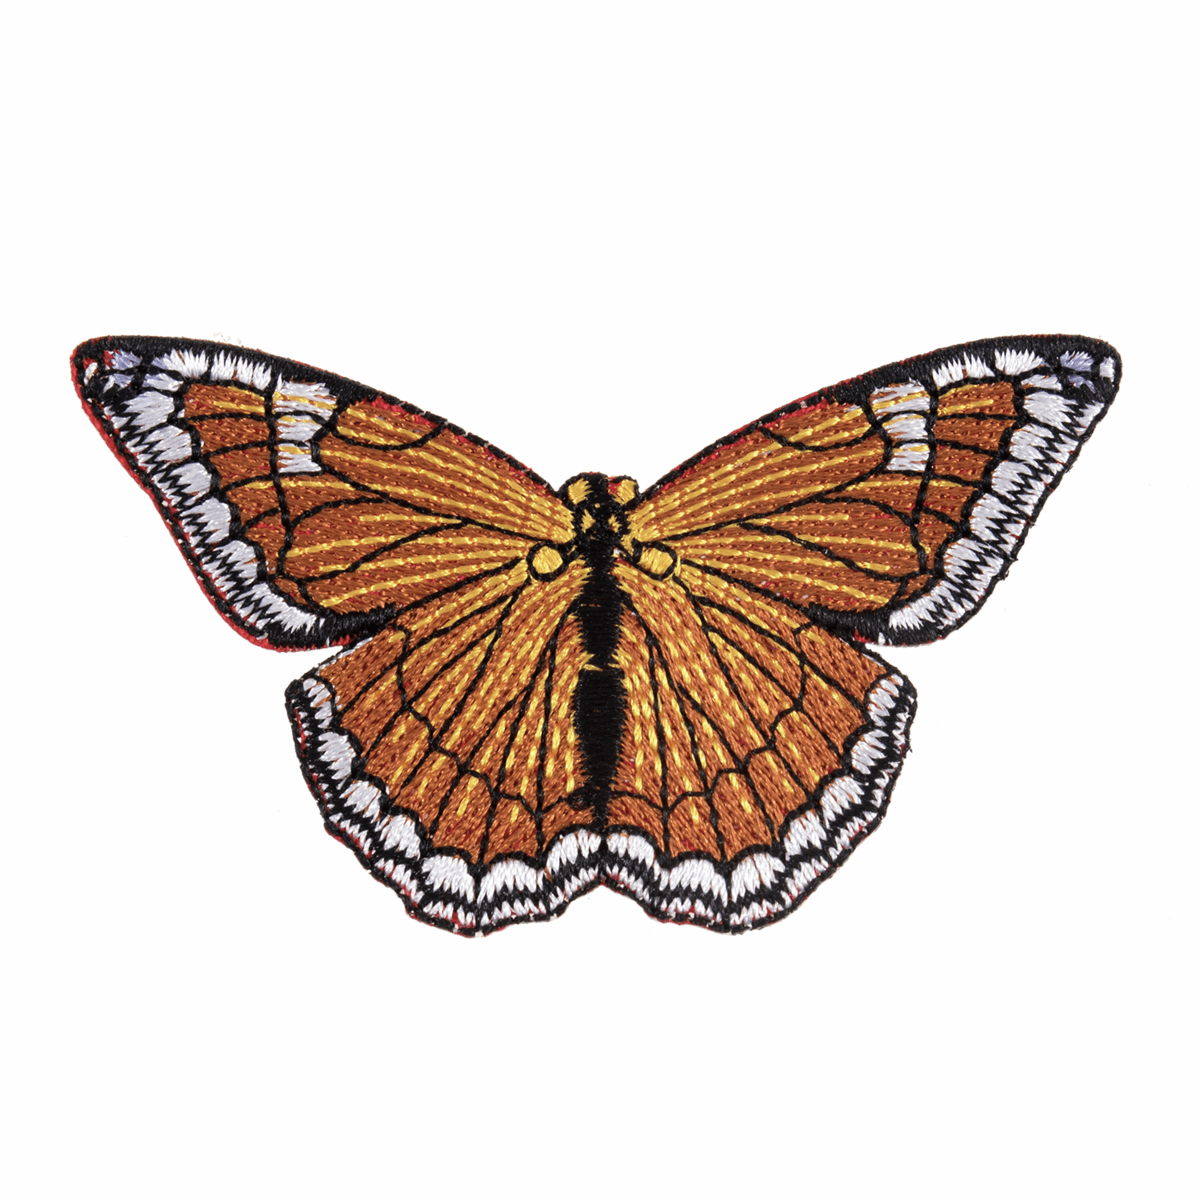 Iron-On/Sew On Motif Patch - Orange Butterfly